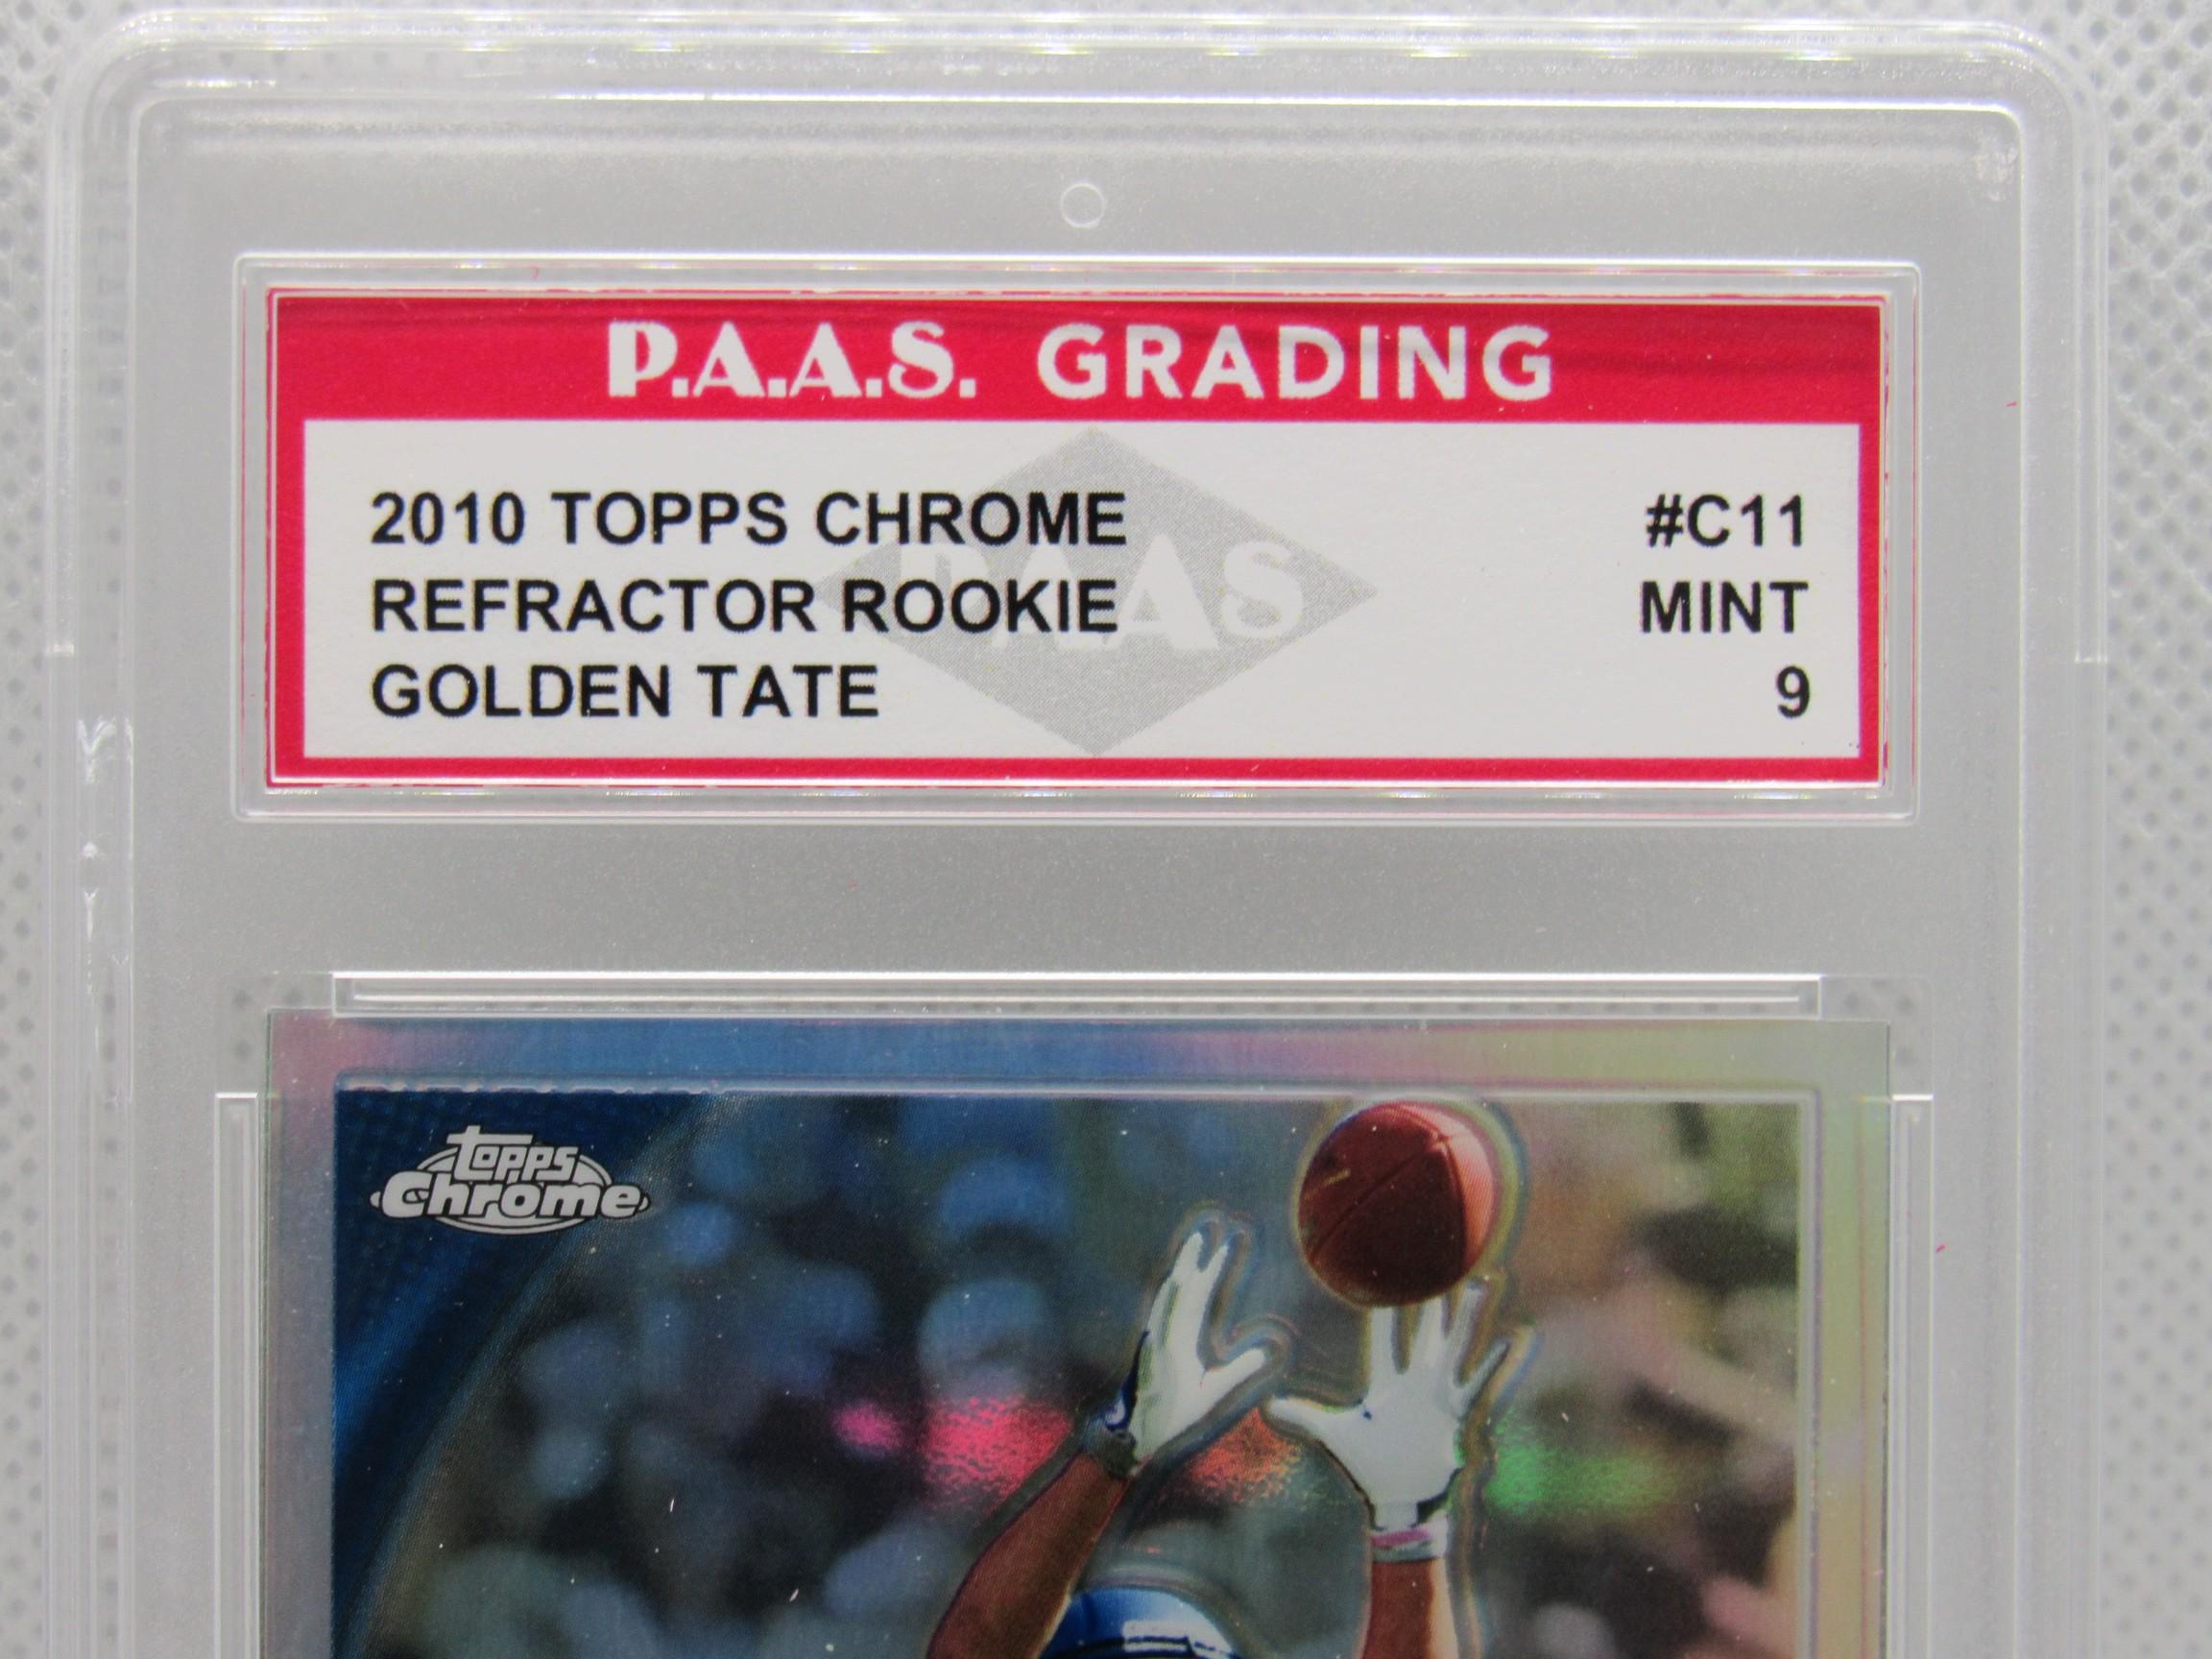 Golden Tate Seahawks 2010 Topps Chrome Refractor Rookie #C11 graded PAAS Mint 9